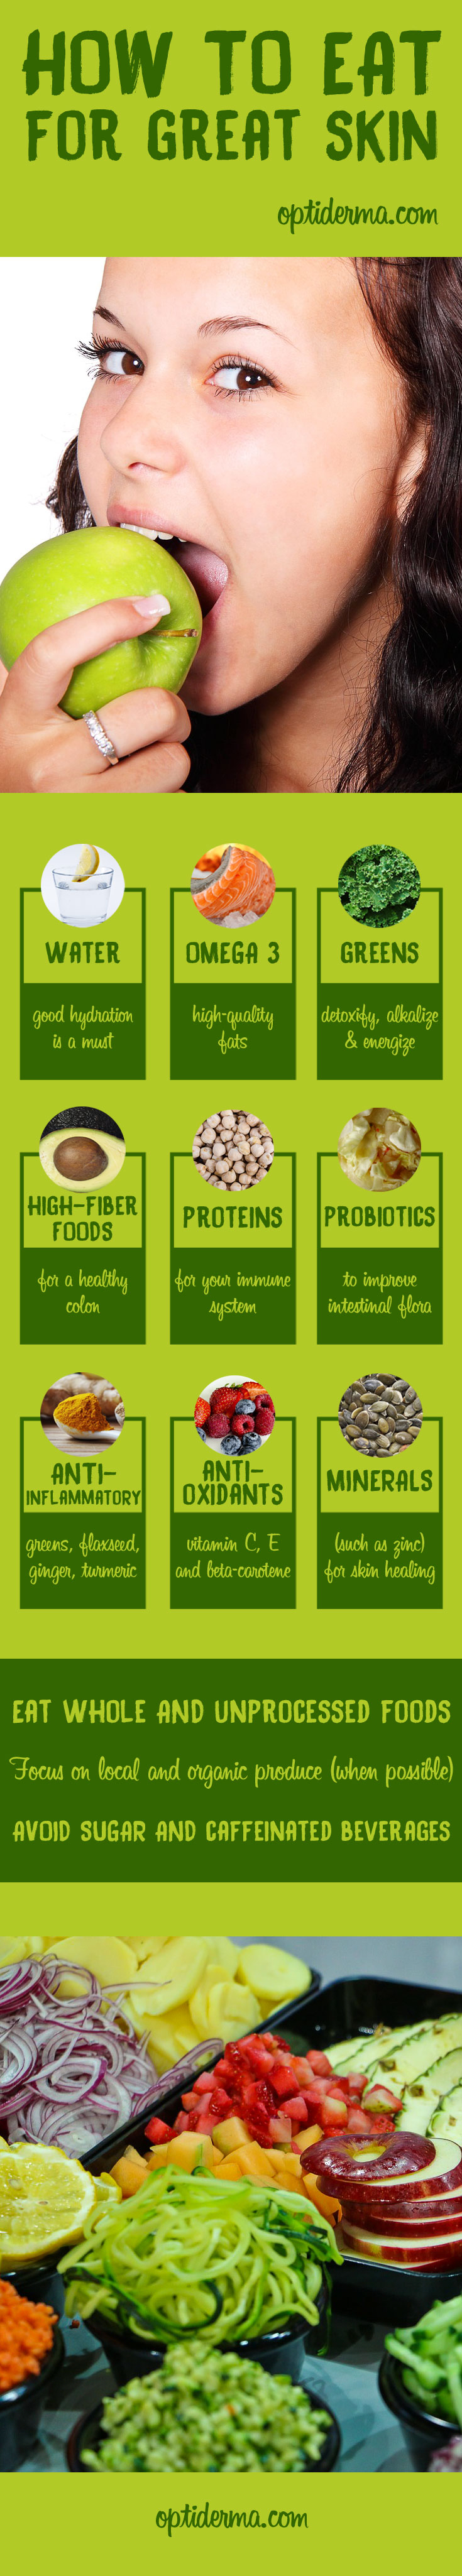 Healthy foods for skin